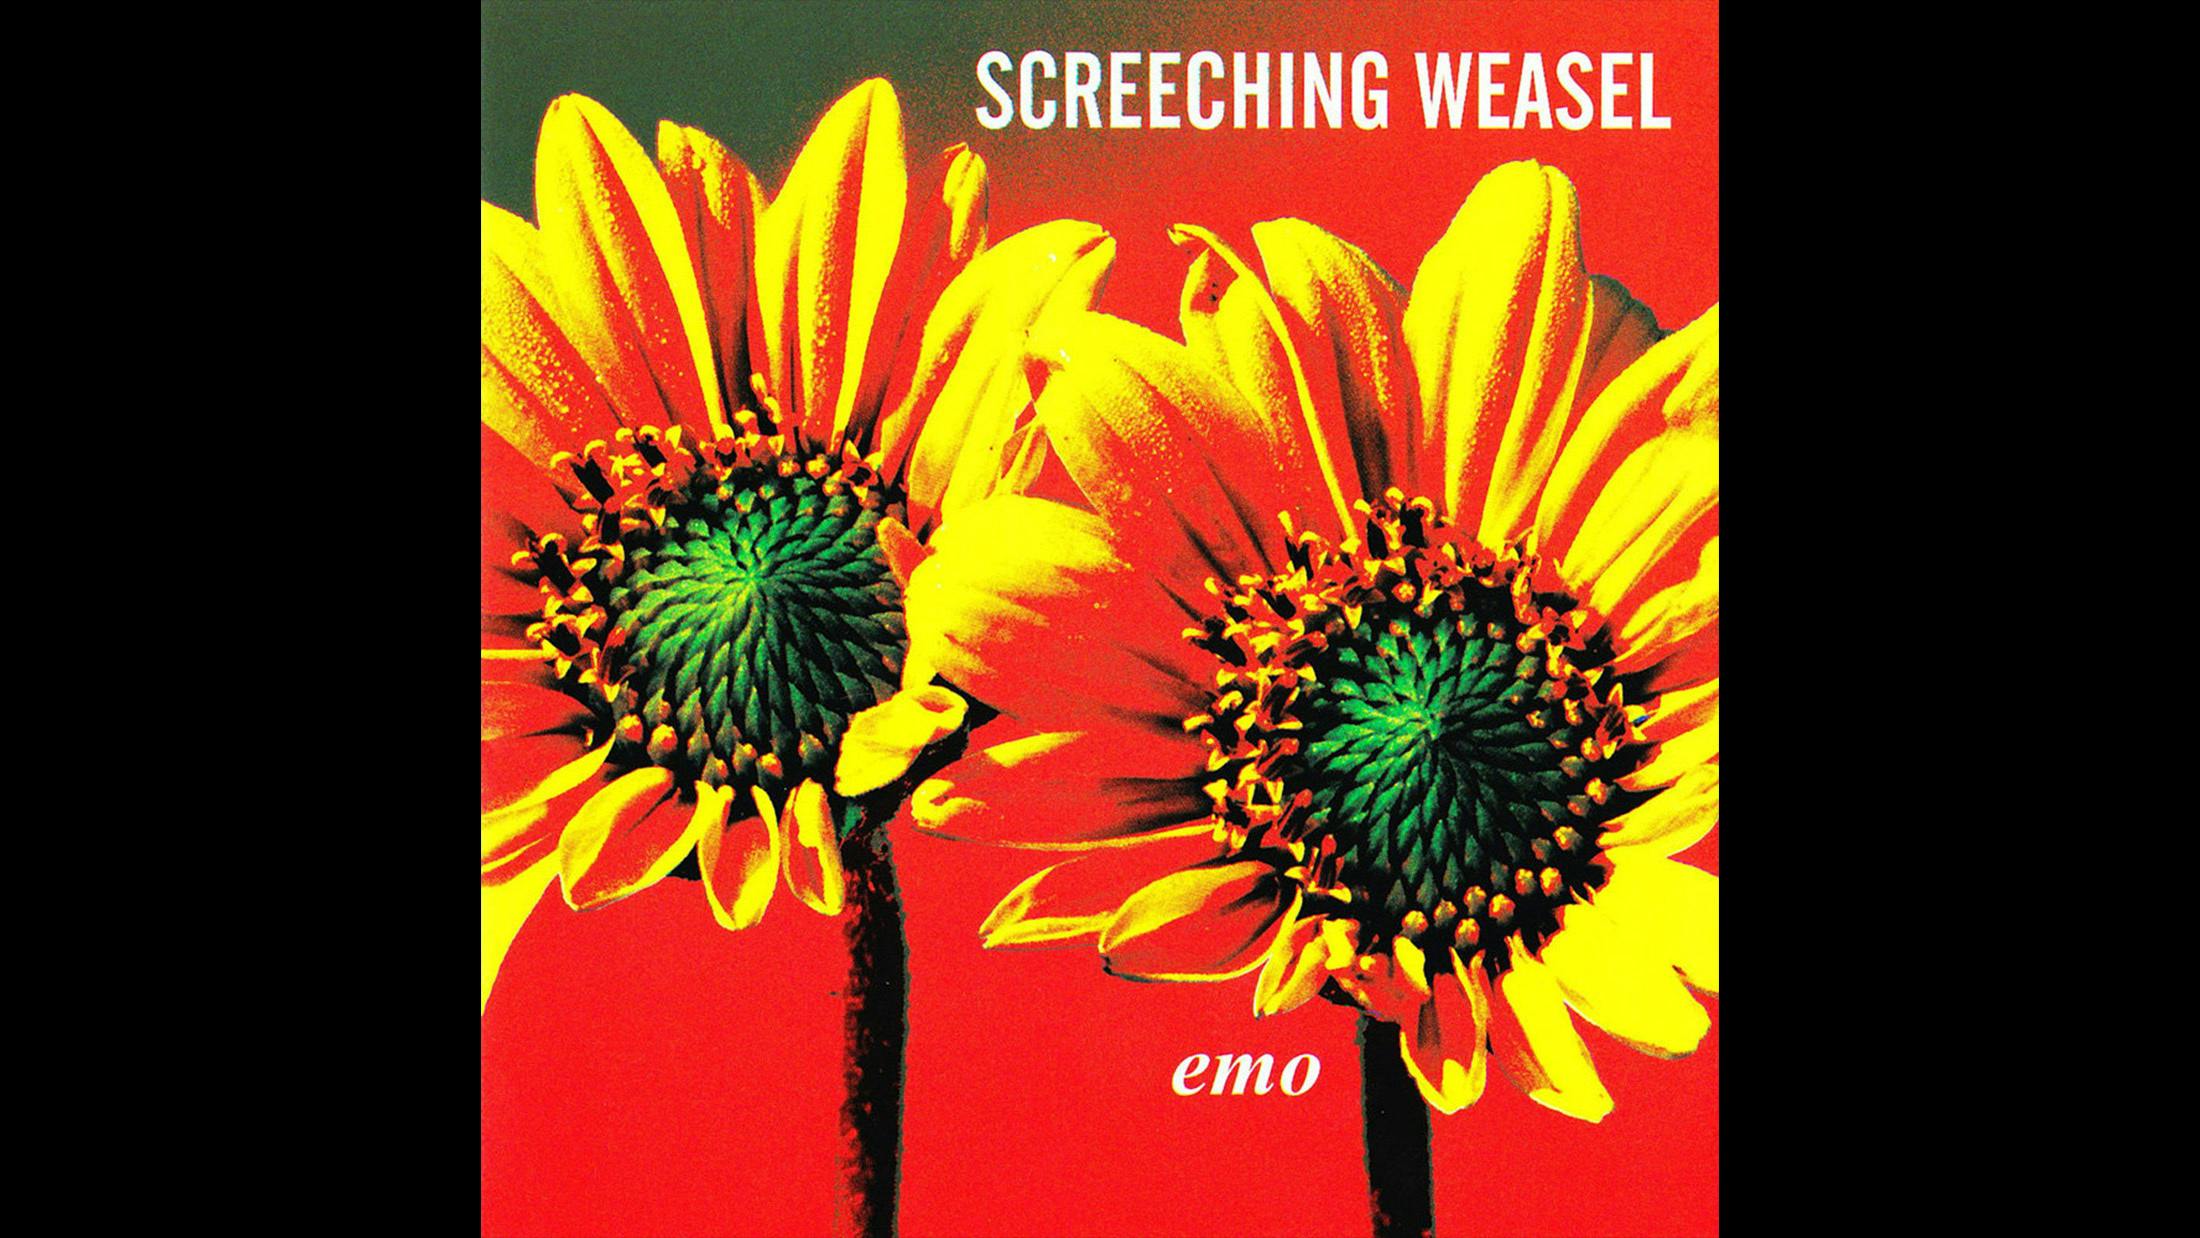 Next year, Chicago’s Screeching Weasel turn 30. During that time, the sole constant has been Ben Weasel – and that man’s knack for genius, melodic punk rock. This, their ninth album, is one of their very best. Sure, it pokes fun at the burgeoning emo explosion of the day, yet is arguably the band’s own most emotional work.